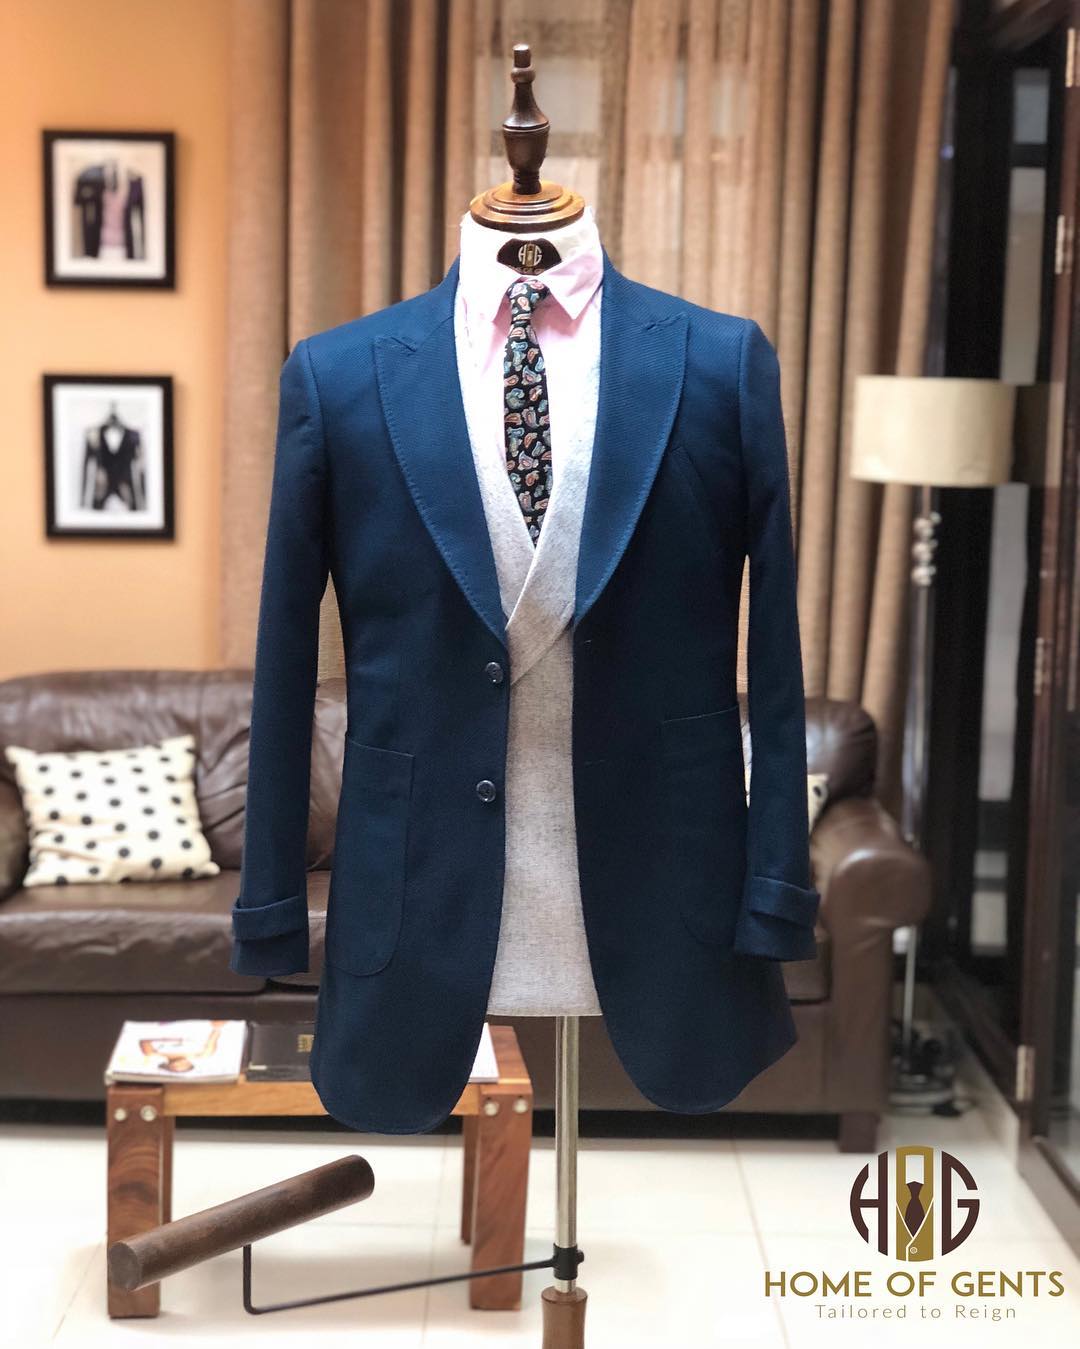 Suits Uganda, Tailored Men's Suits, Wedding Suits, Bespoke Suits & Clothing, Business & Corporate Wear, Fashion & Styling, Custom Tailor Made Fitting Suits in Kampala Uganda, Home of Gents Uganda, Ugabox